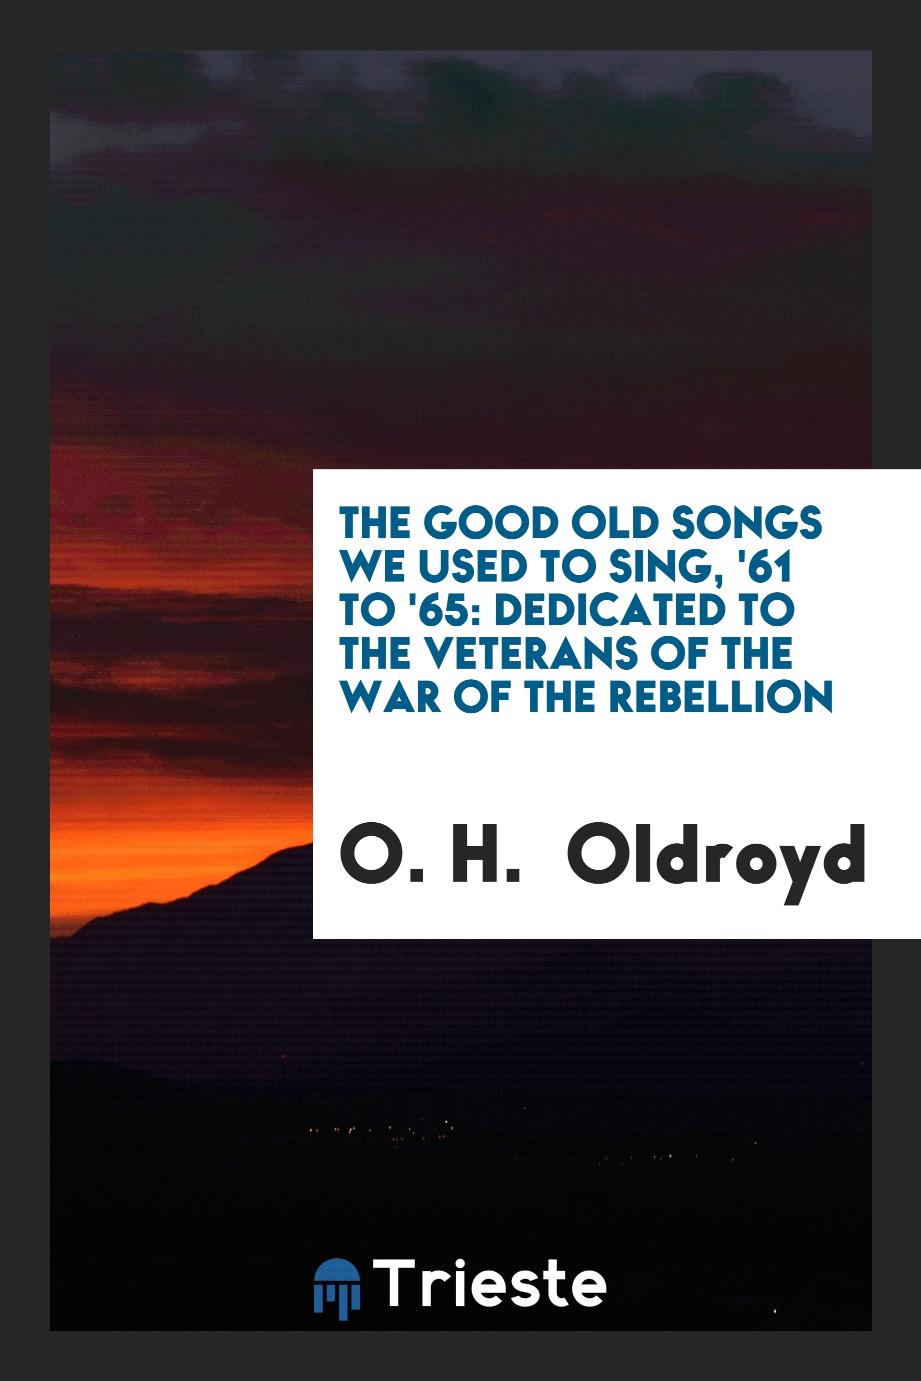 The Good Old Songs We Used to Sing, '61 to '65: Dedicated to the Veterans of the War of the Rebellion